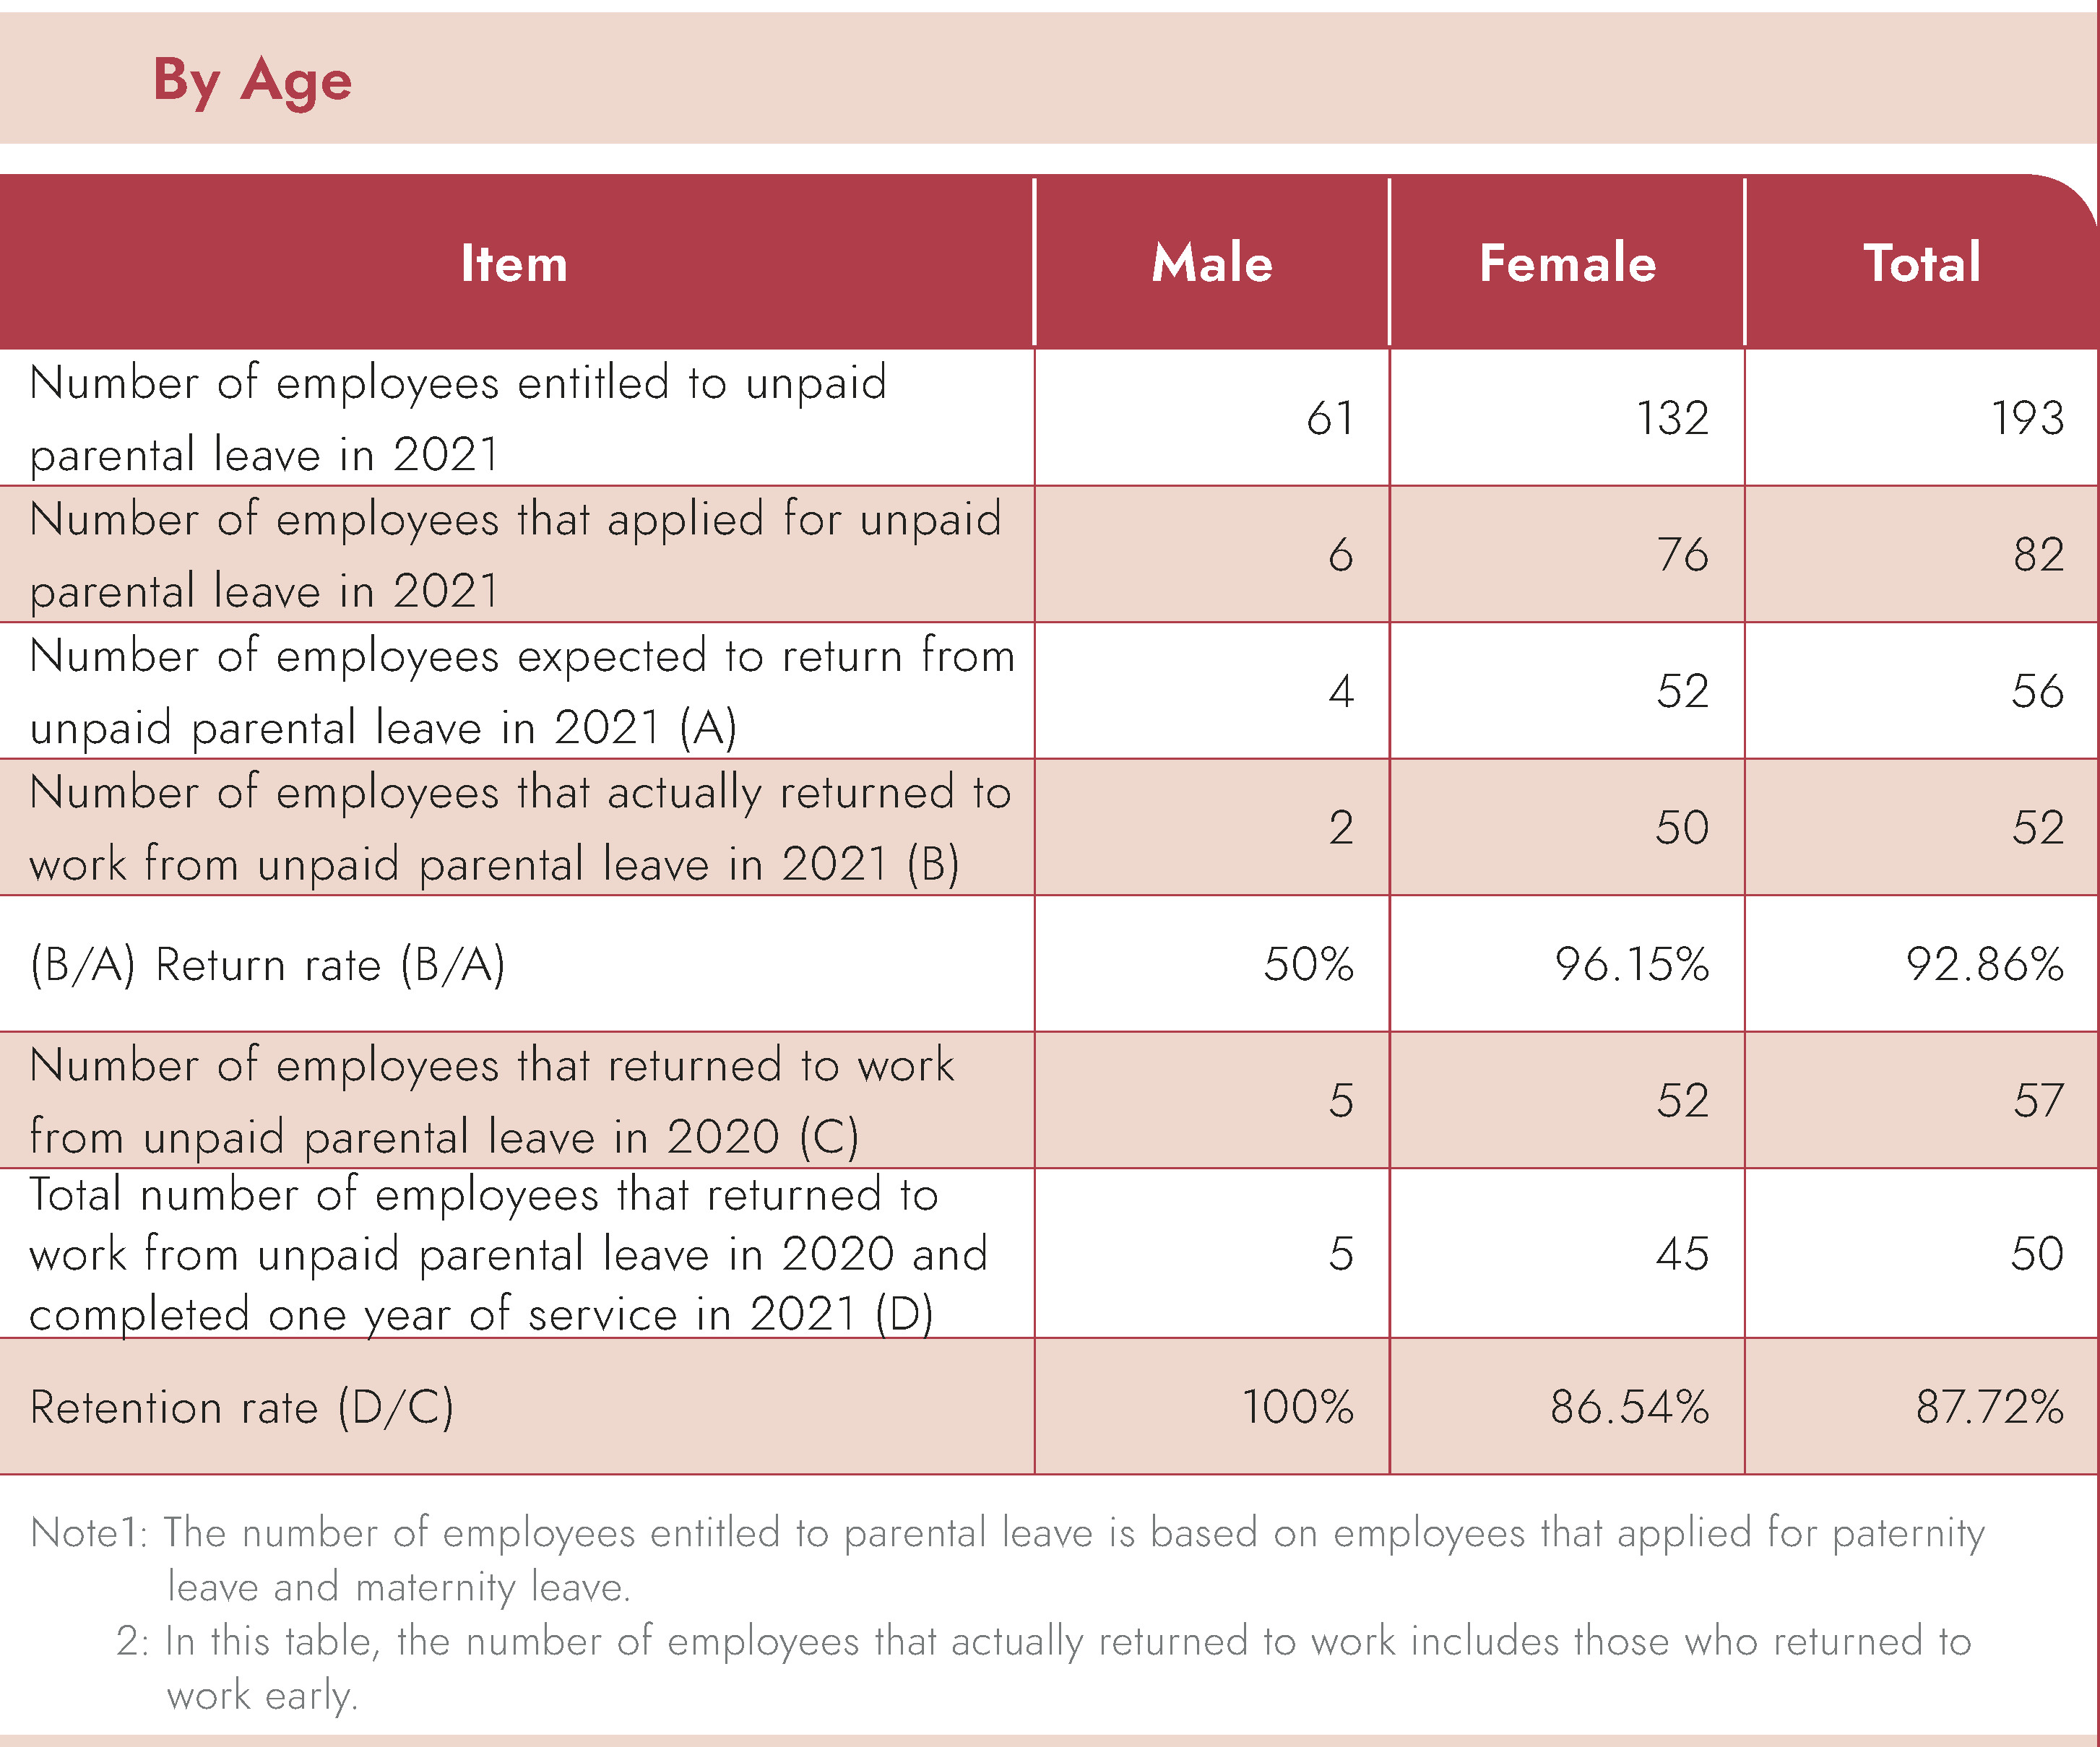 Status of Unpaid Parental Leaves-By Age